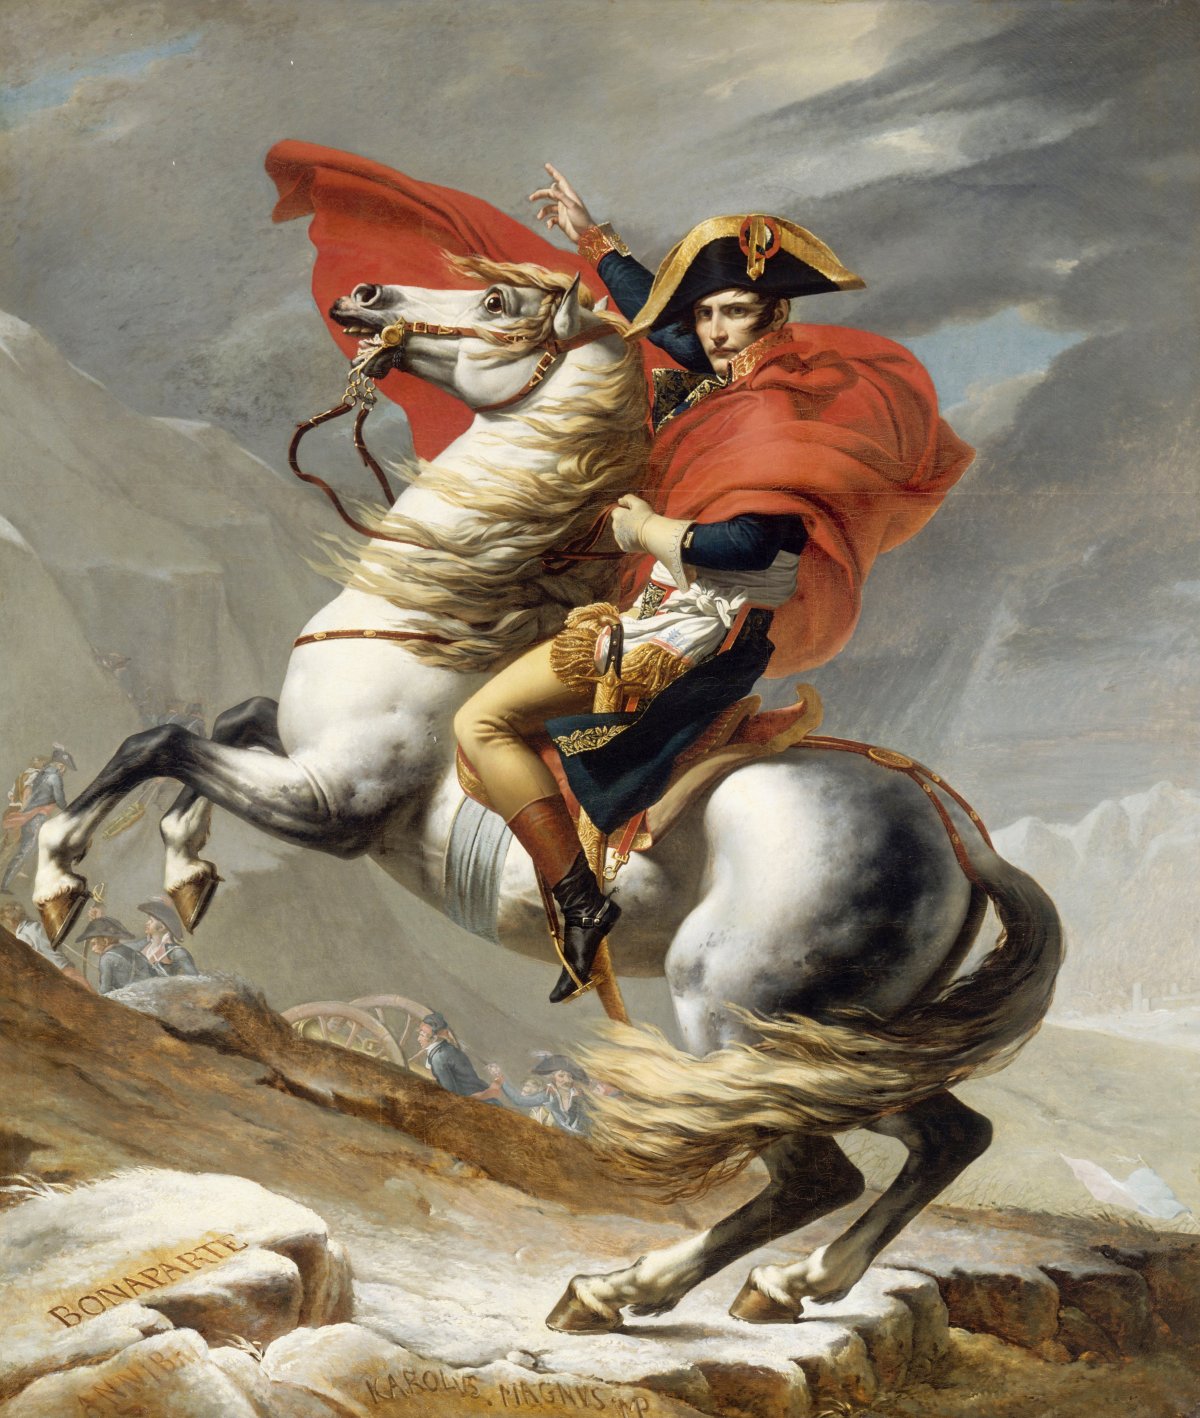 Napoleon Crossing the Alps, by Jacques-Louis David (1805)